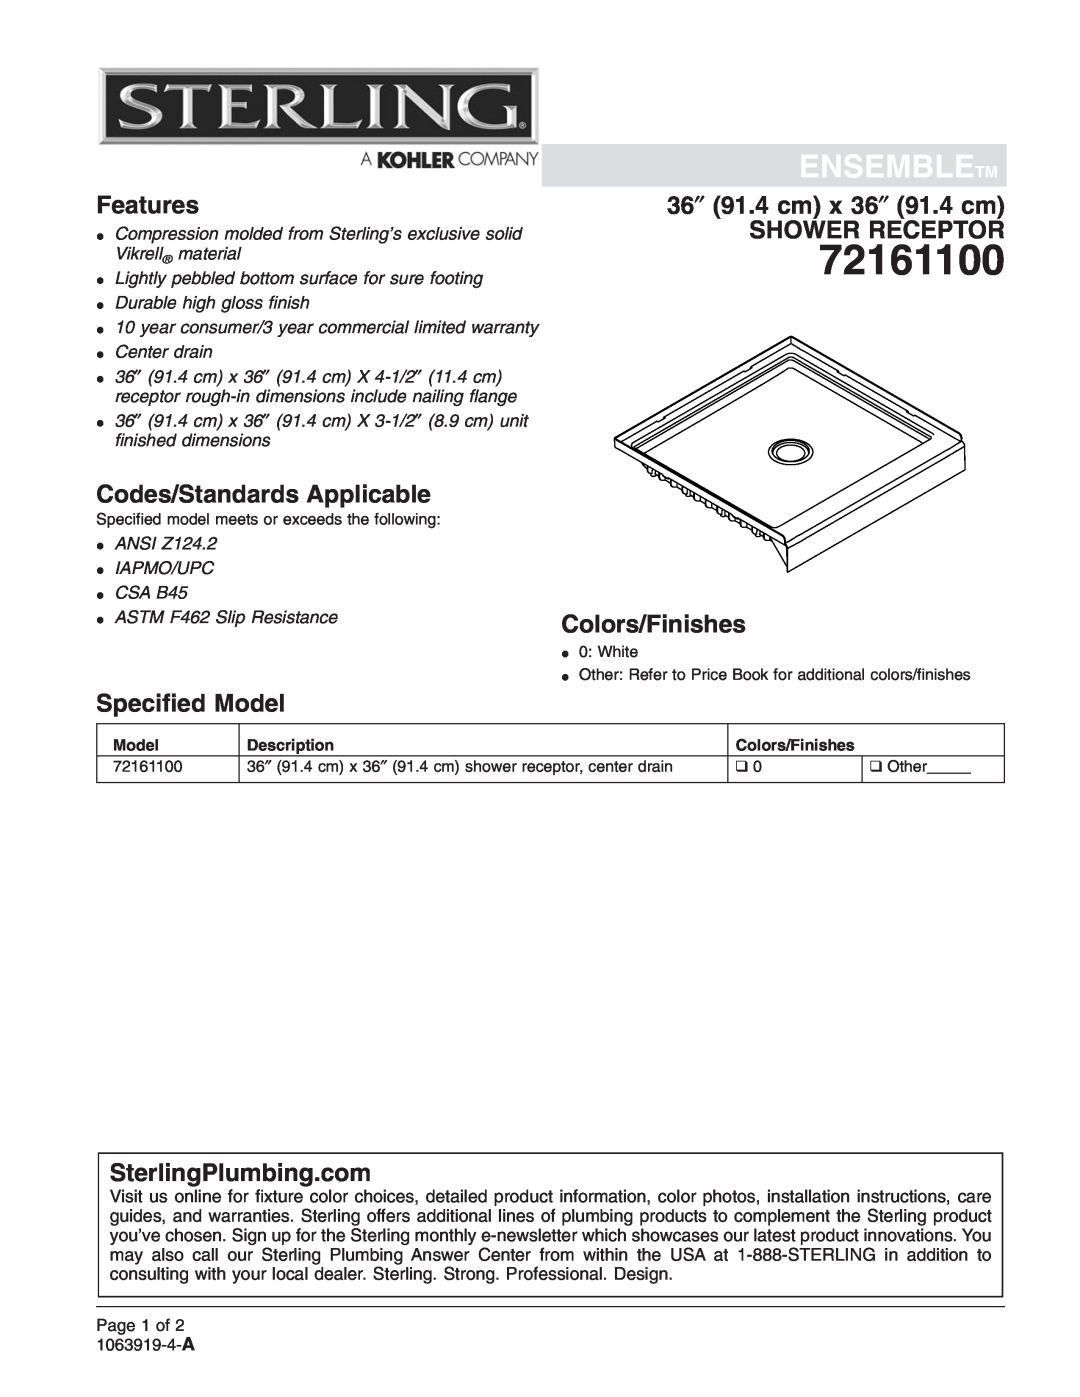 Sterling Plumbing 72161100 warranty Ensembletm, Features, Codes/Standards Applicable, Speciﬁed Model, Colors/Finishes 